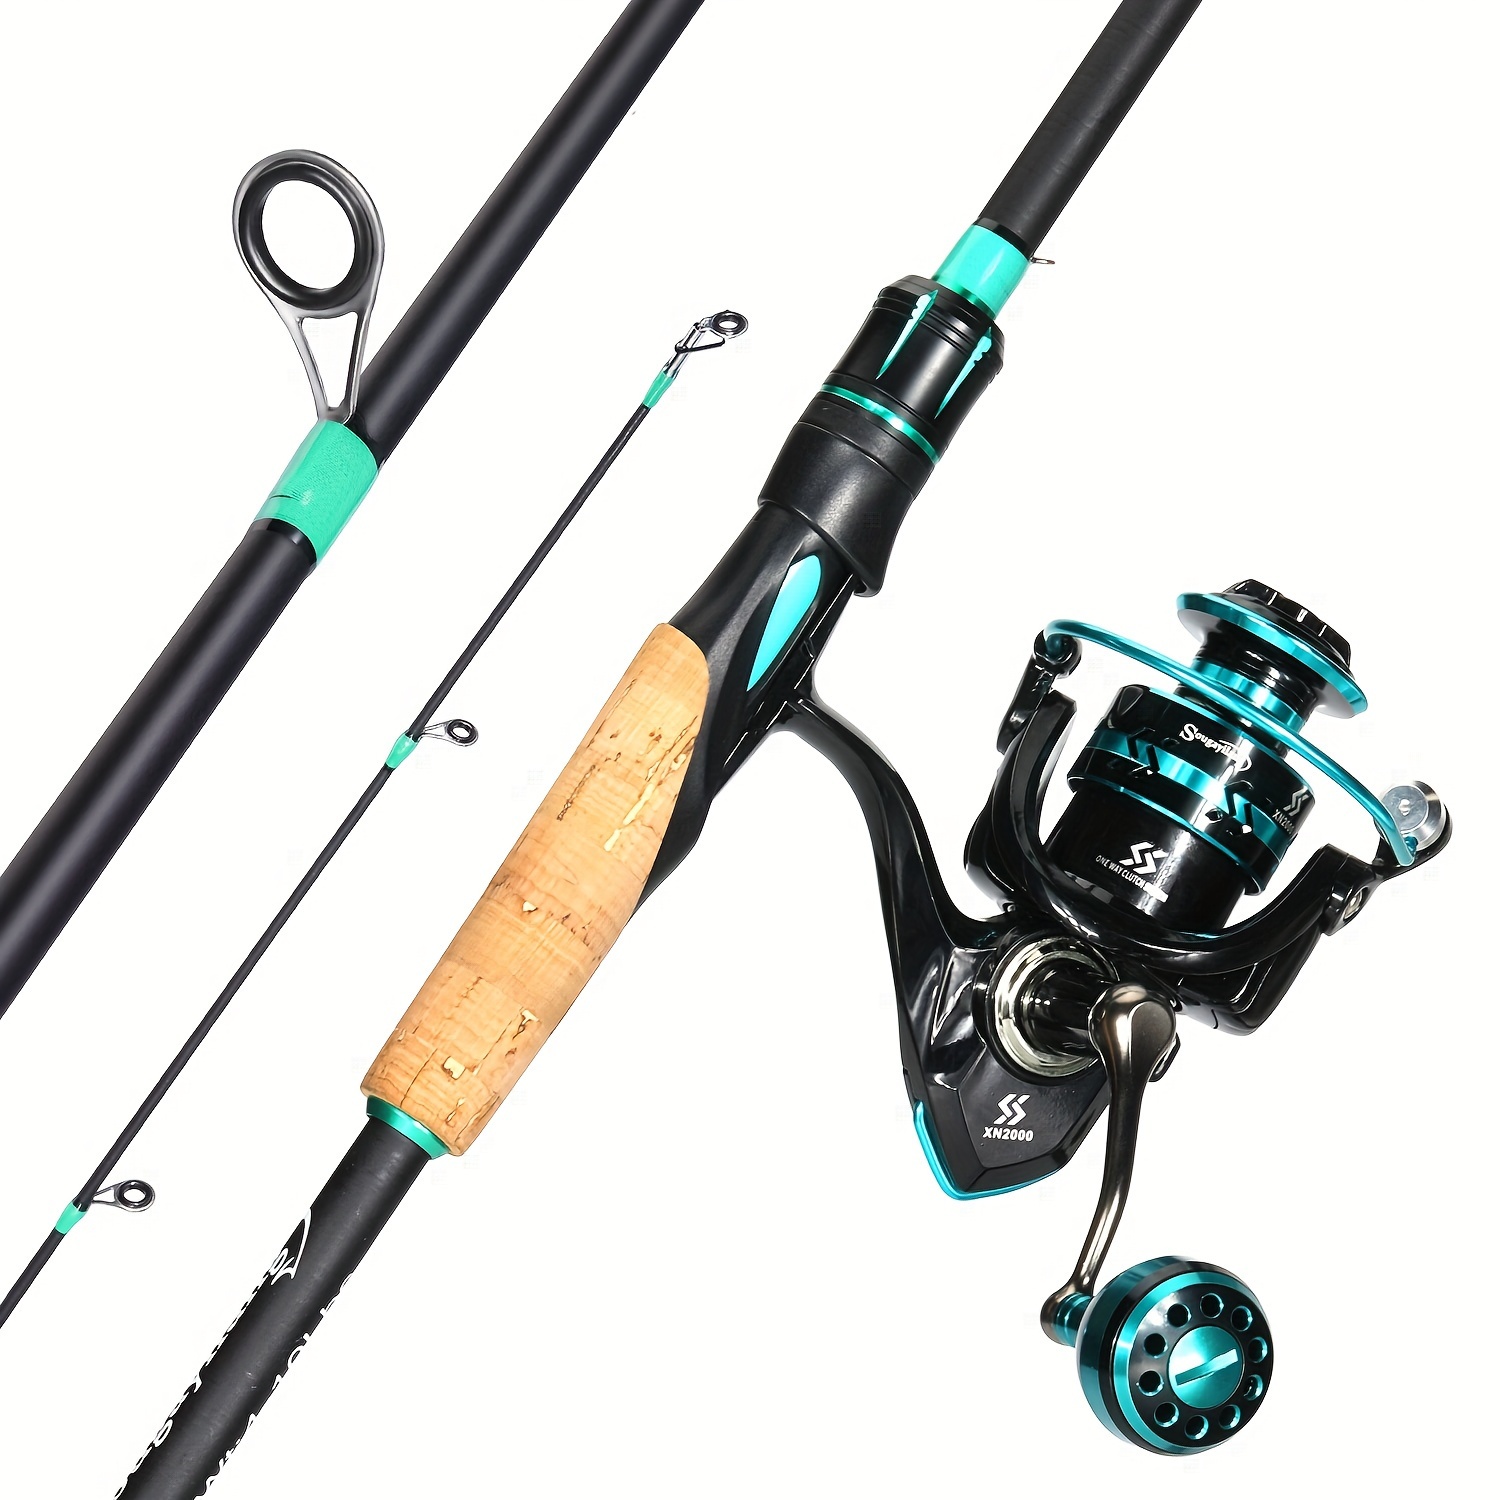 Sougayilang 1 Set Fishing Rod And Reel Combo, Including 4 Sections Portable  Carbon Rod, 5.0:1 Gear Ratio 12+1 BB Spinning Reel, Fishing Bait, And More